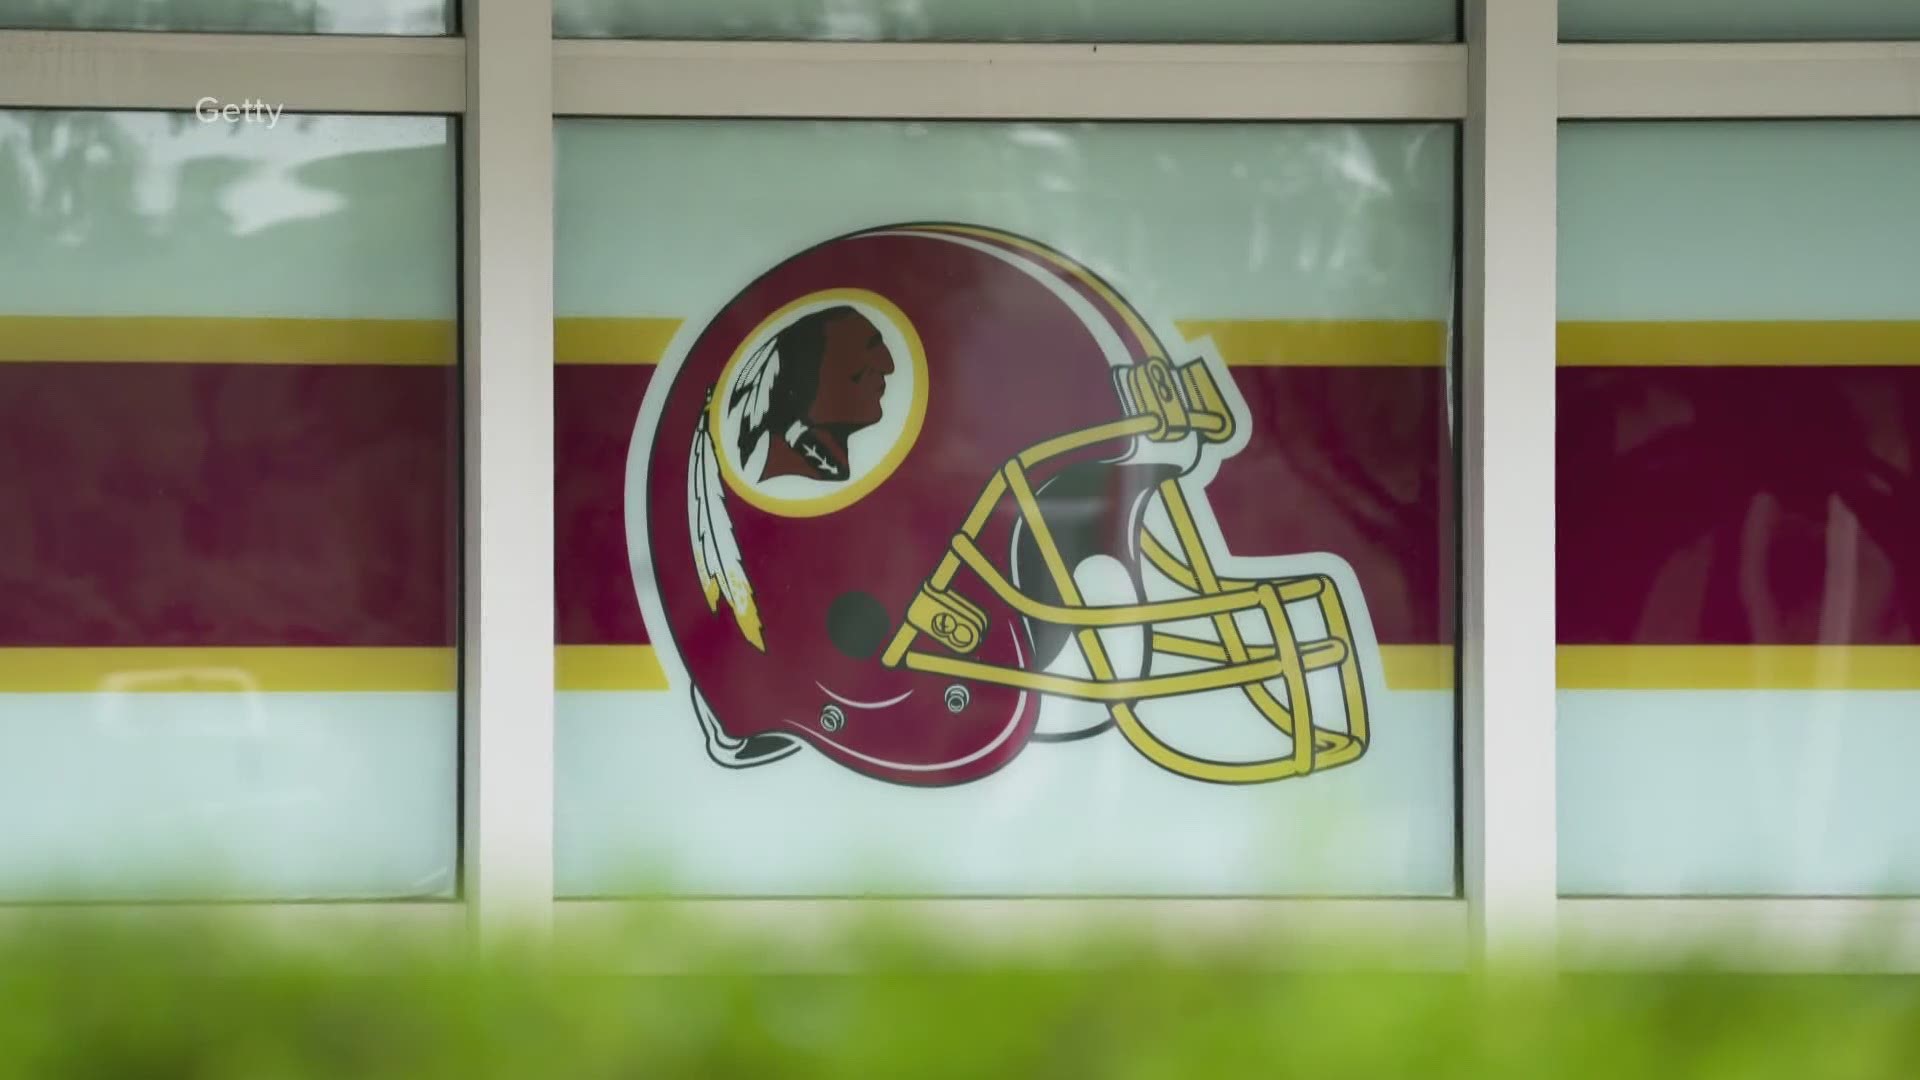 The Washington 'Redskins' name will be retired.